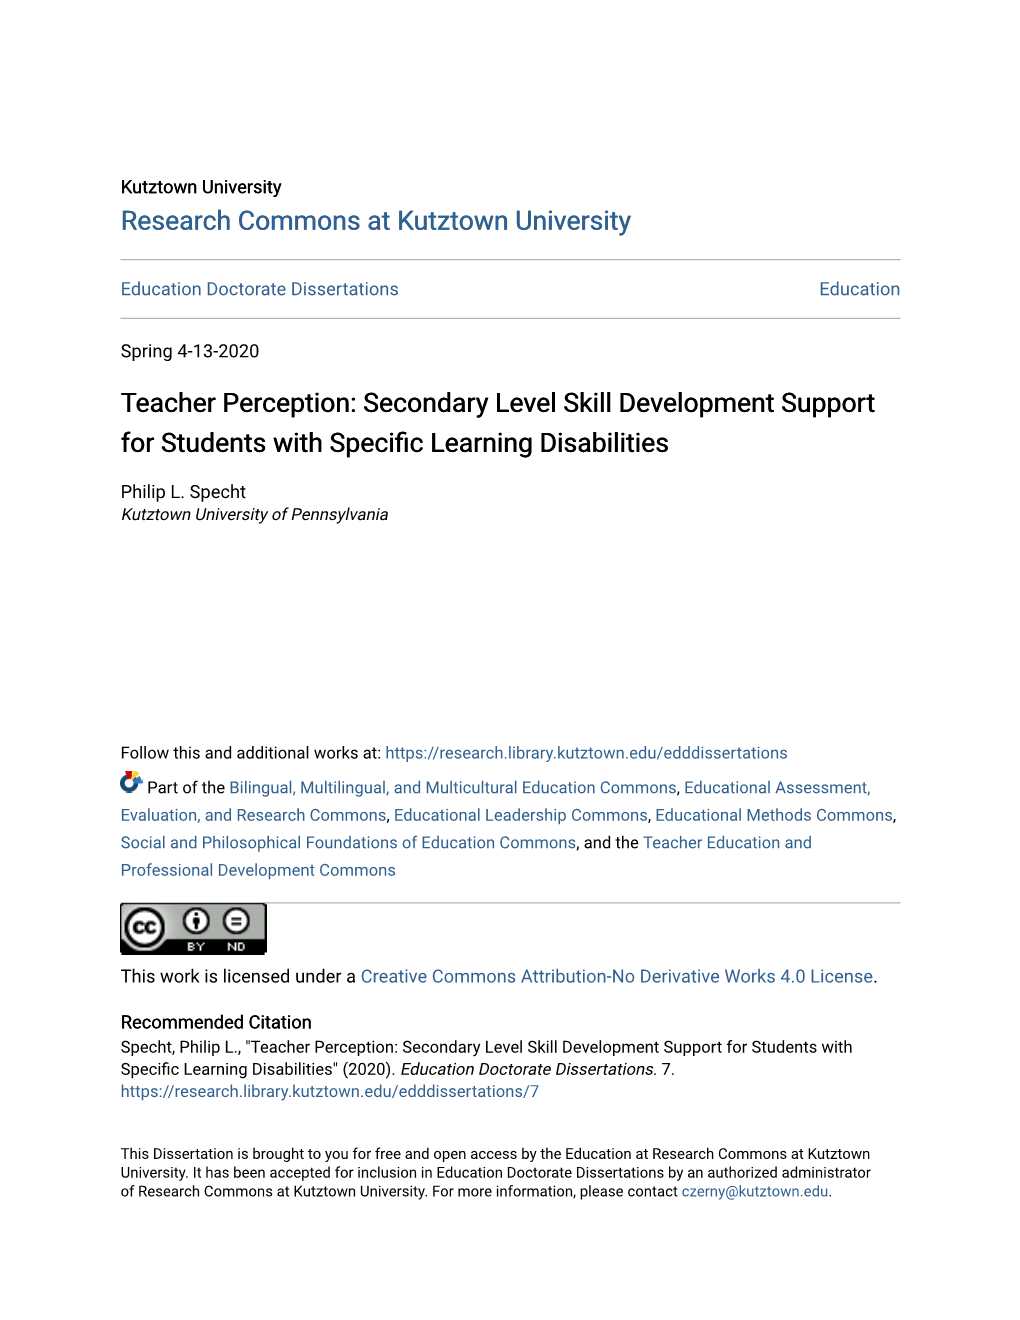 Teacher Perception: Secondary Level Skill Development Support for Students with Specific Learning Disabilities